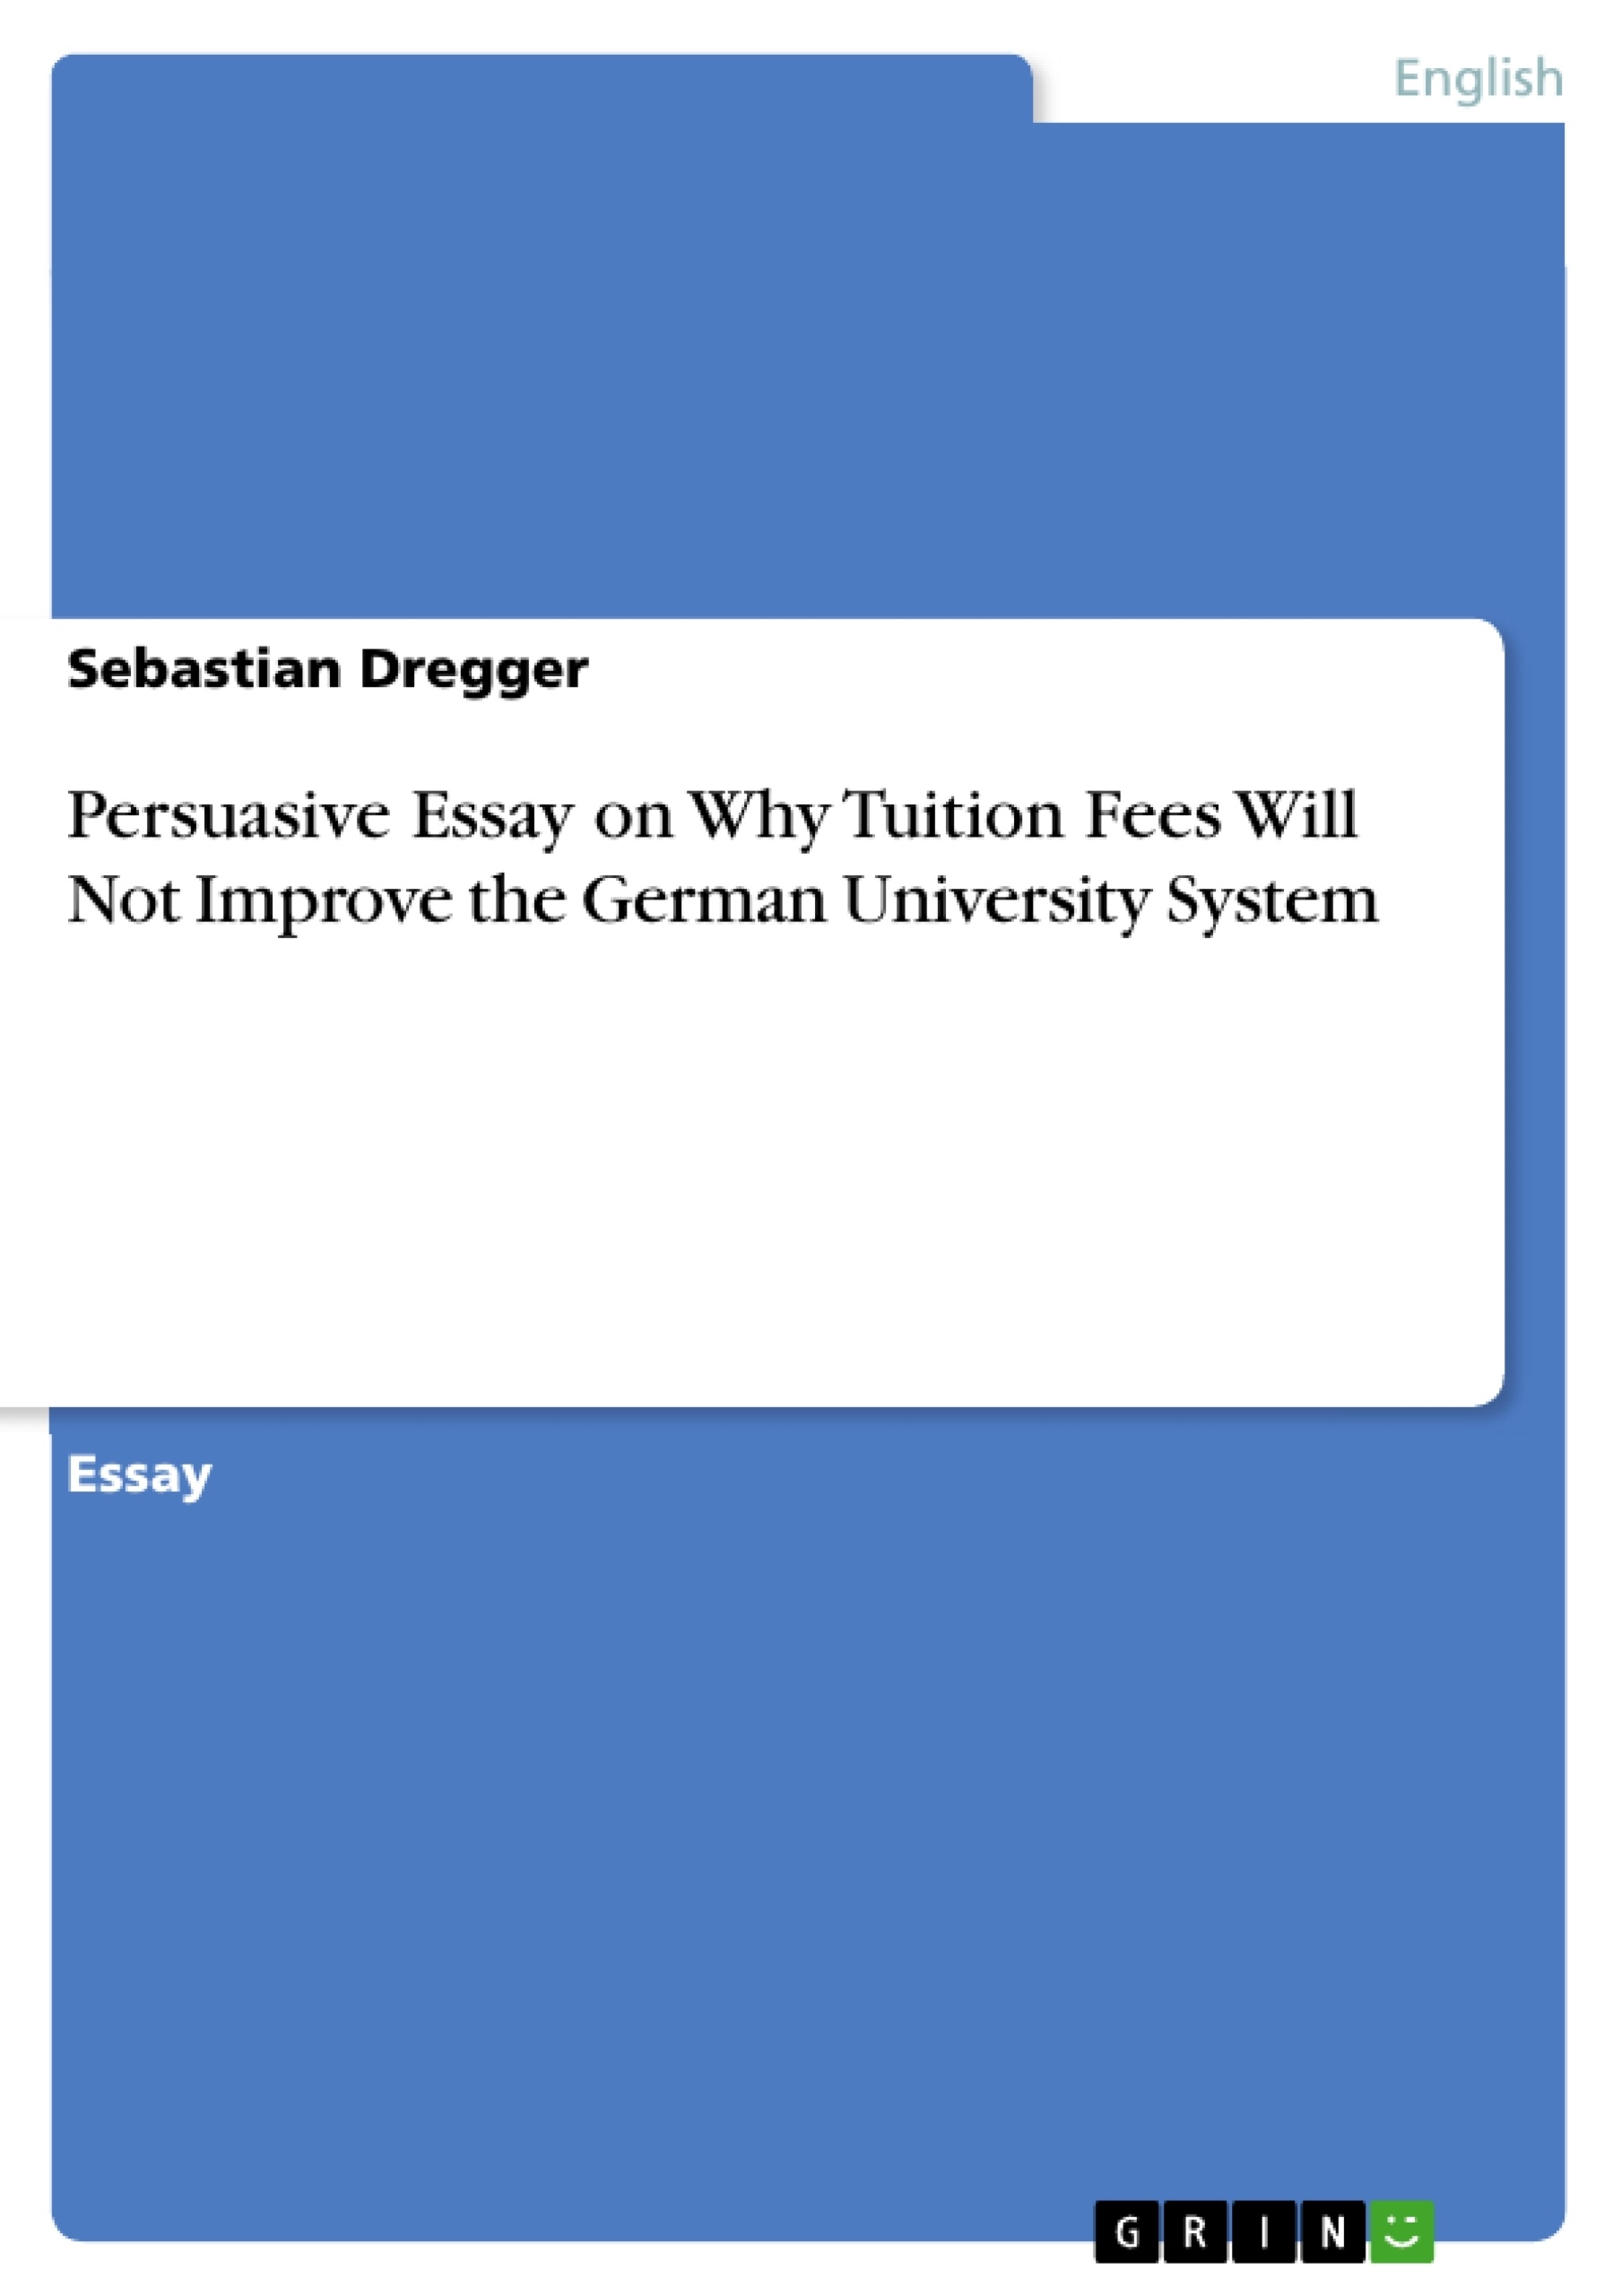 Título: Persuasive Essay on Why Tuition Fees Will Not Improve the German University System 